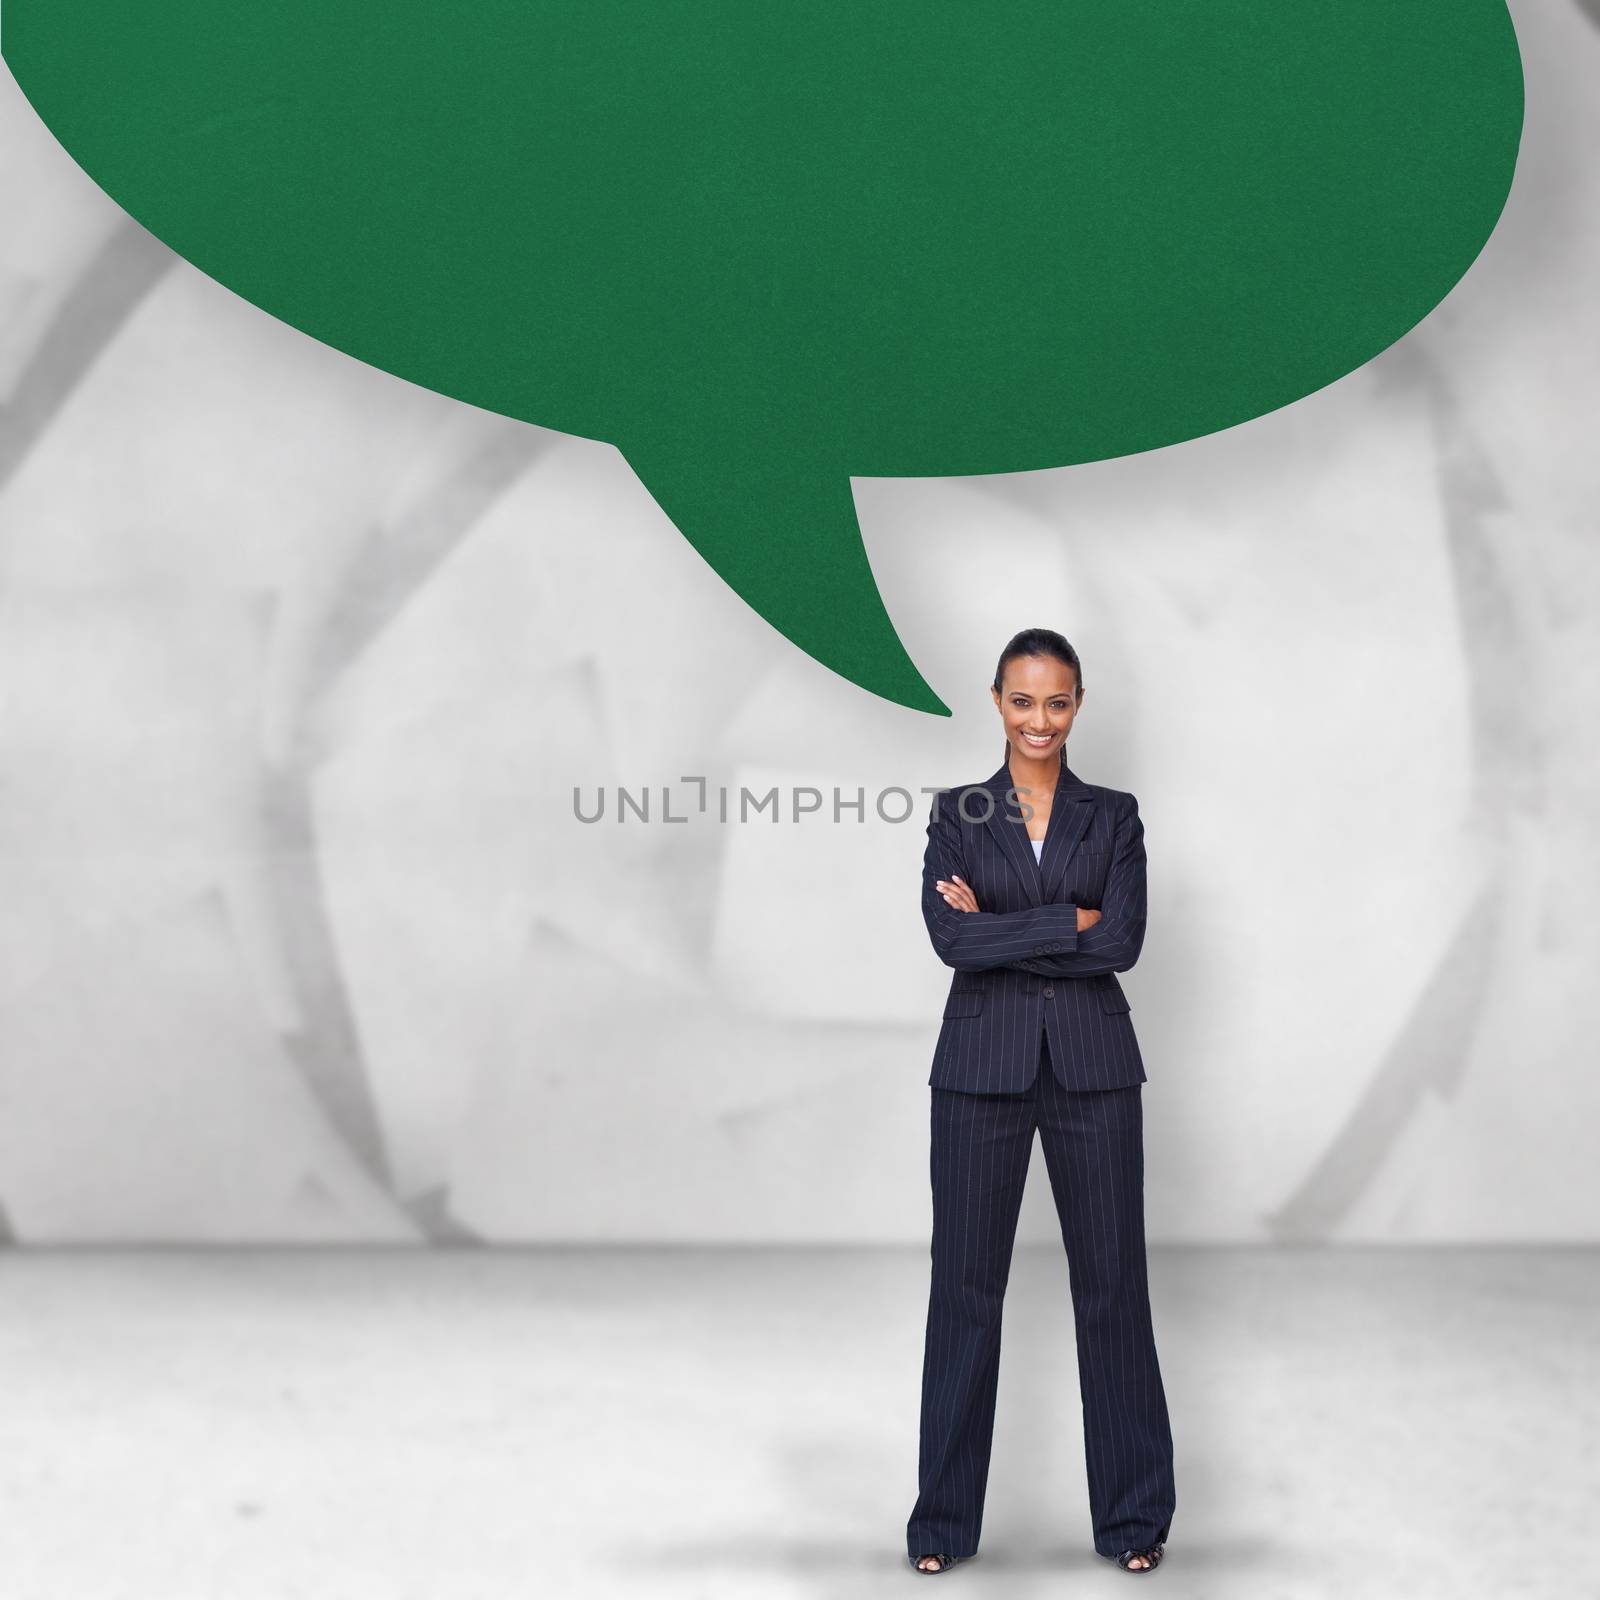 Confident businesswoman smiling at the camera against speech bubble